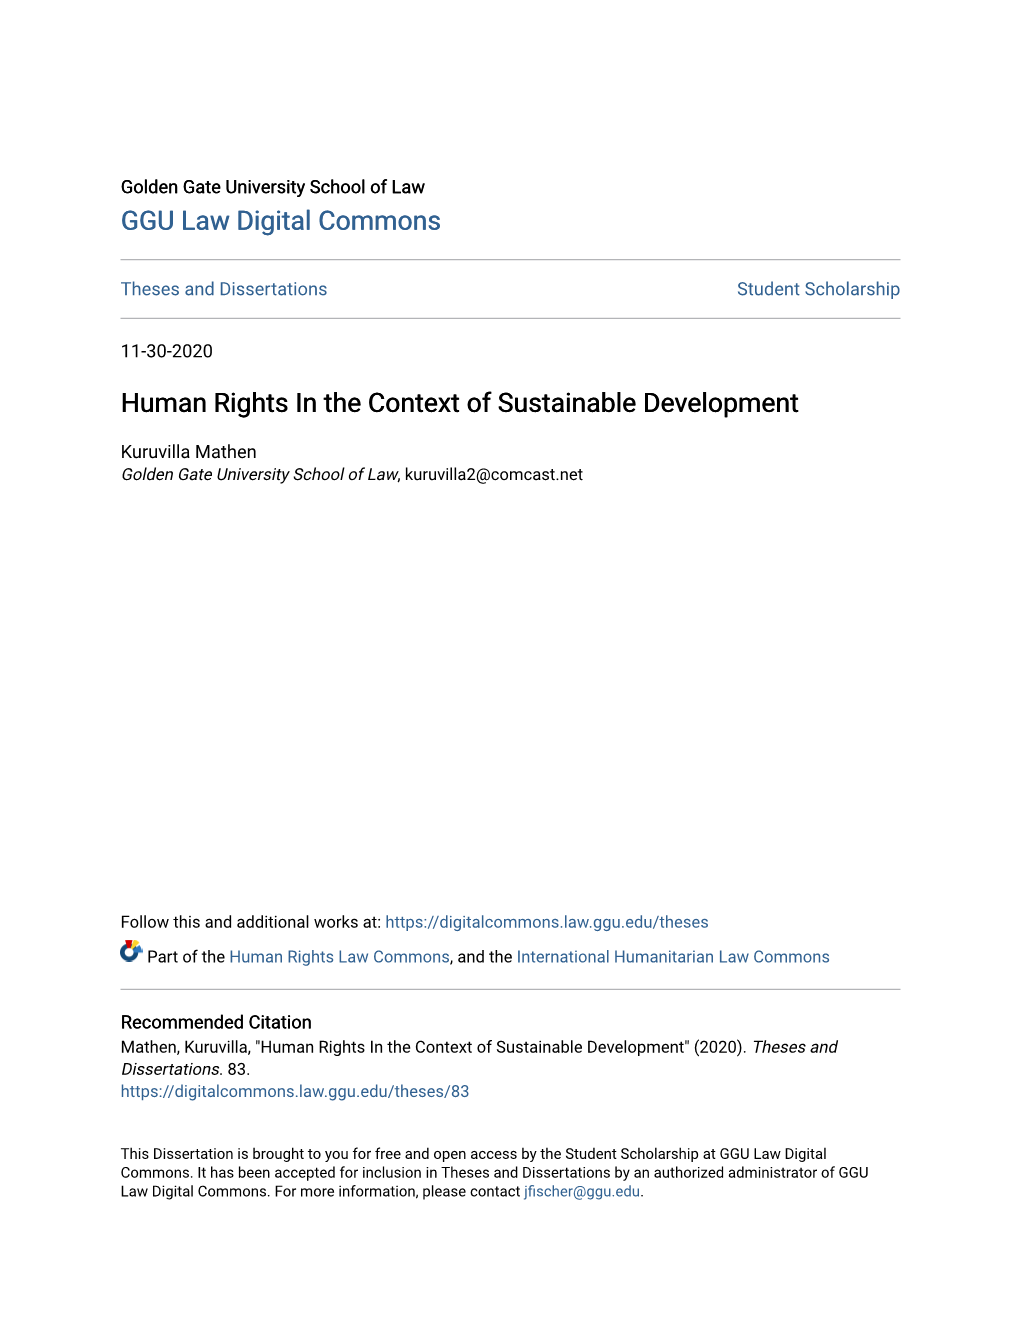 Human Rights in the Context of Sustainable Development